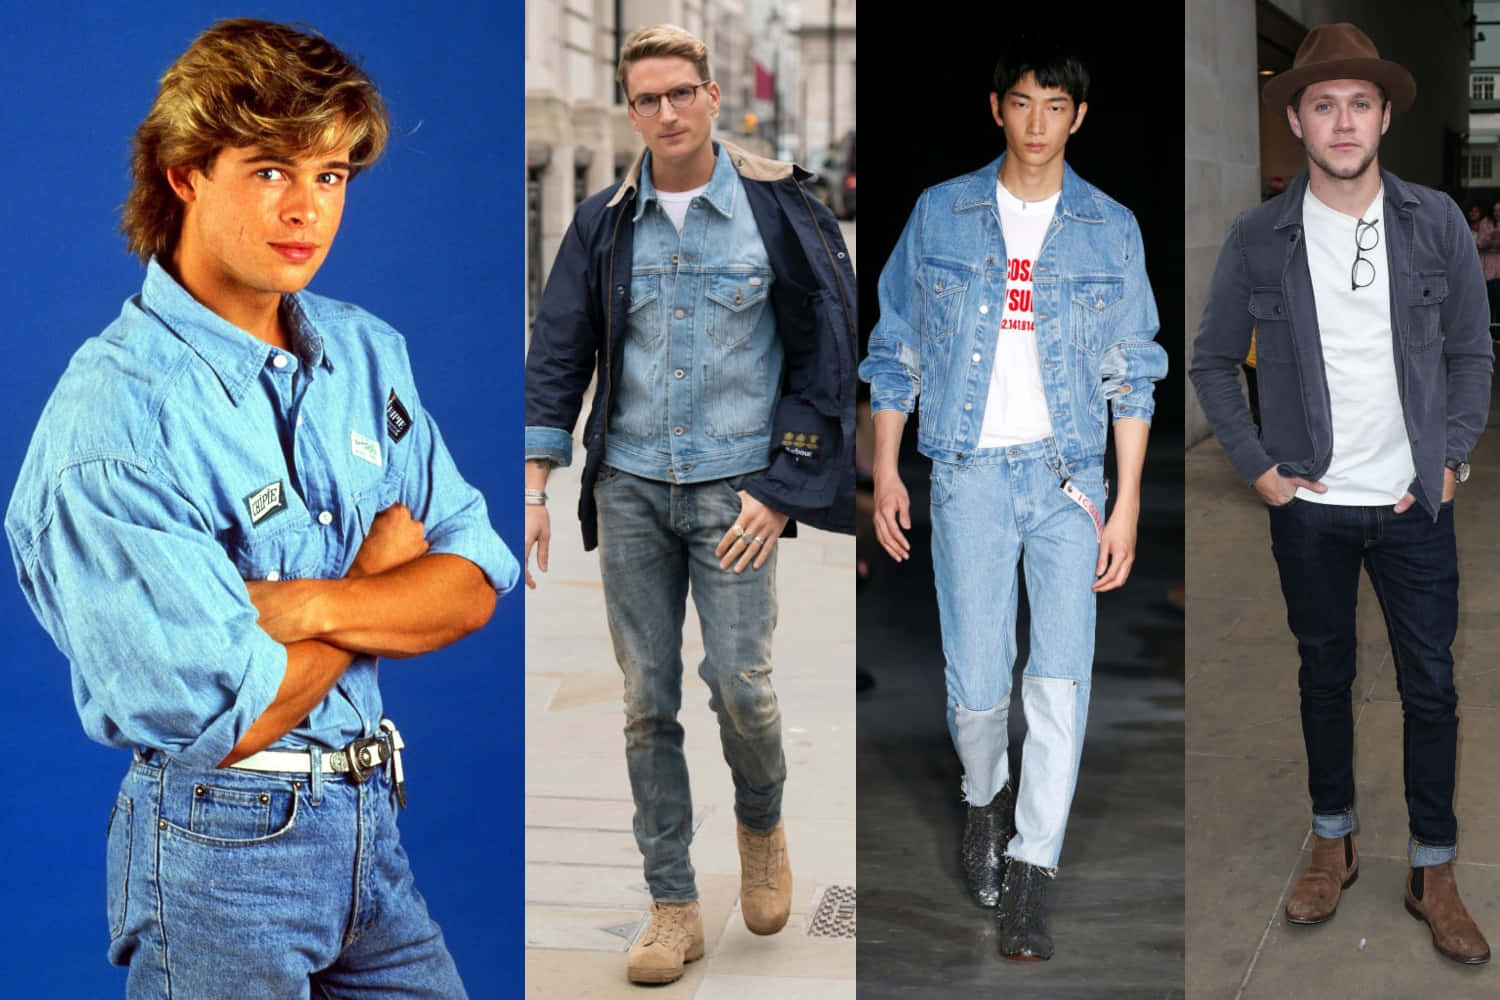 Download Relive the glory days of 80s fashion with this iconic look ...